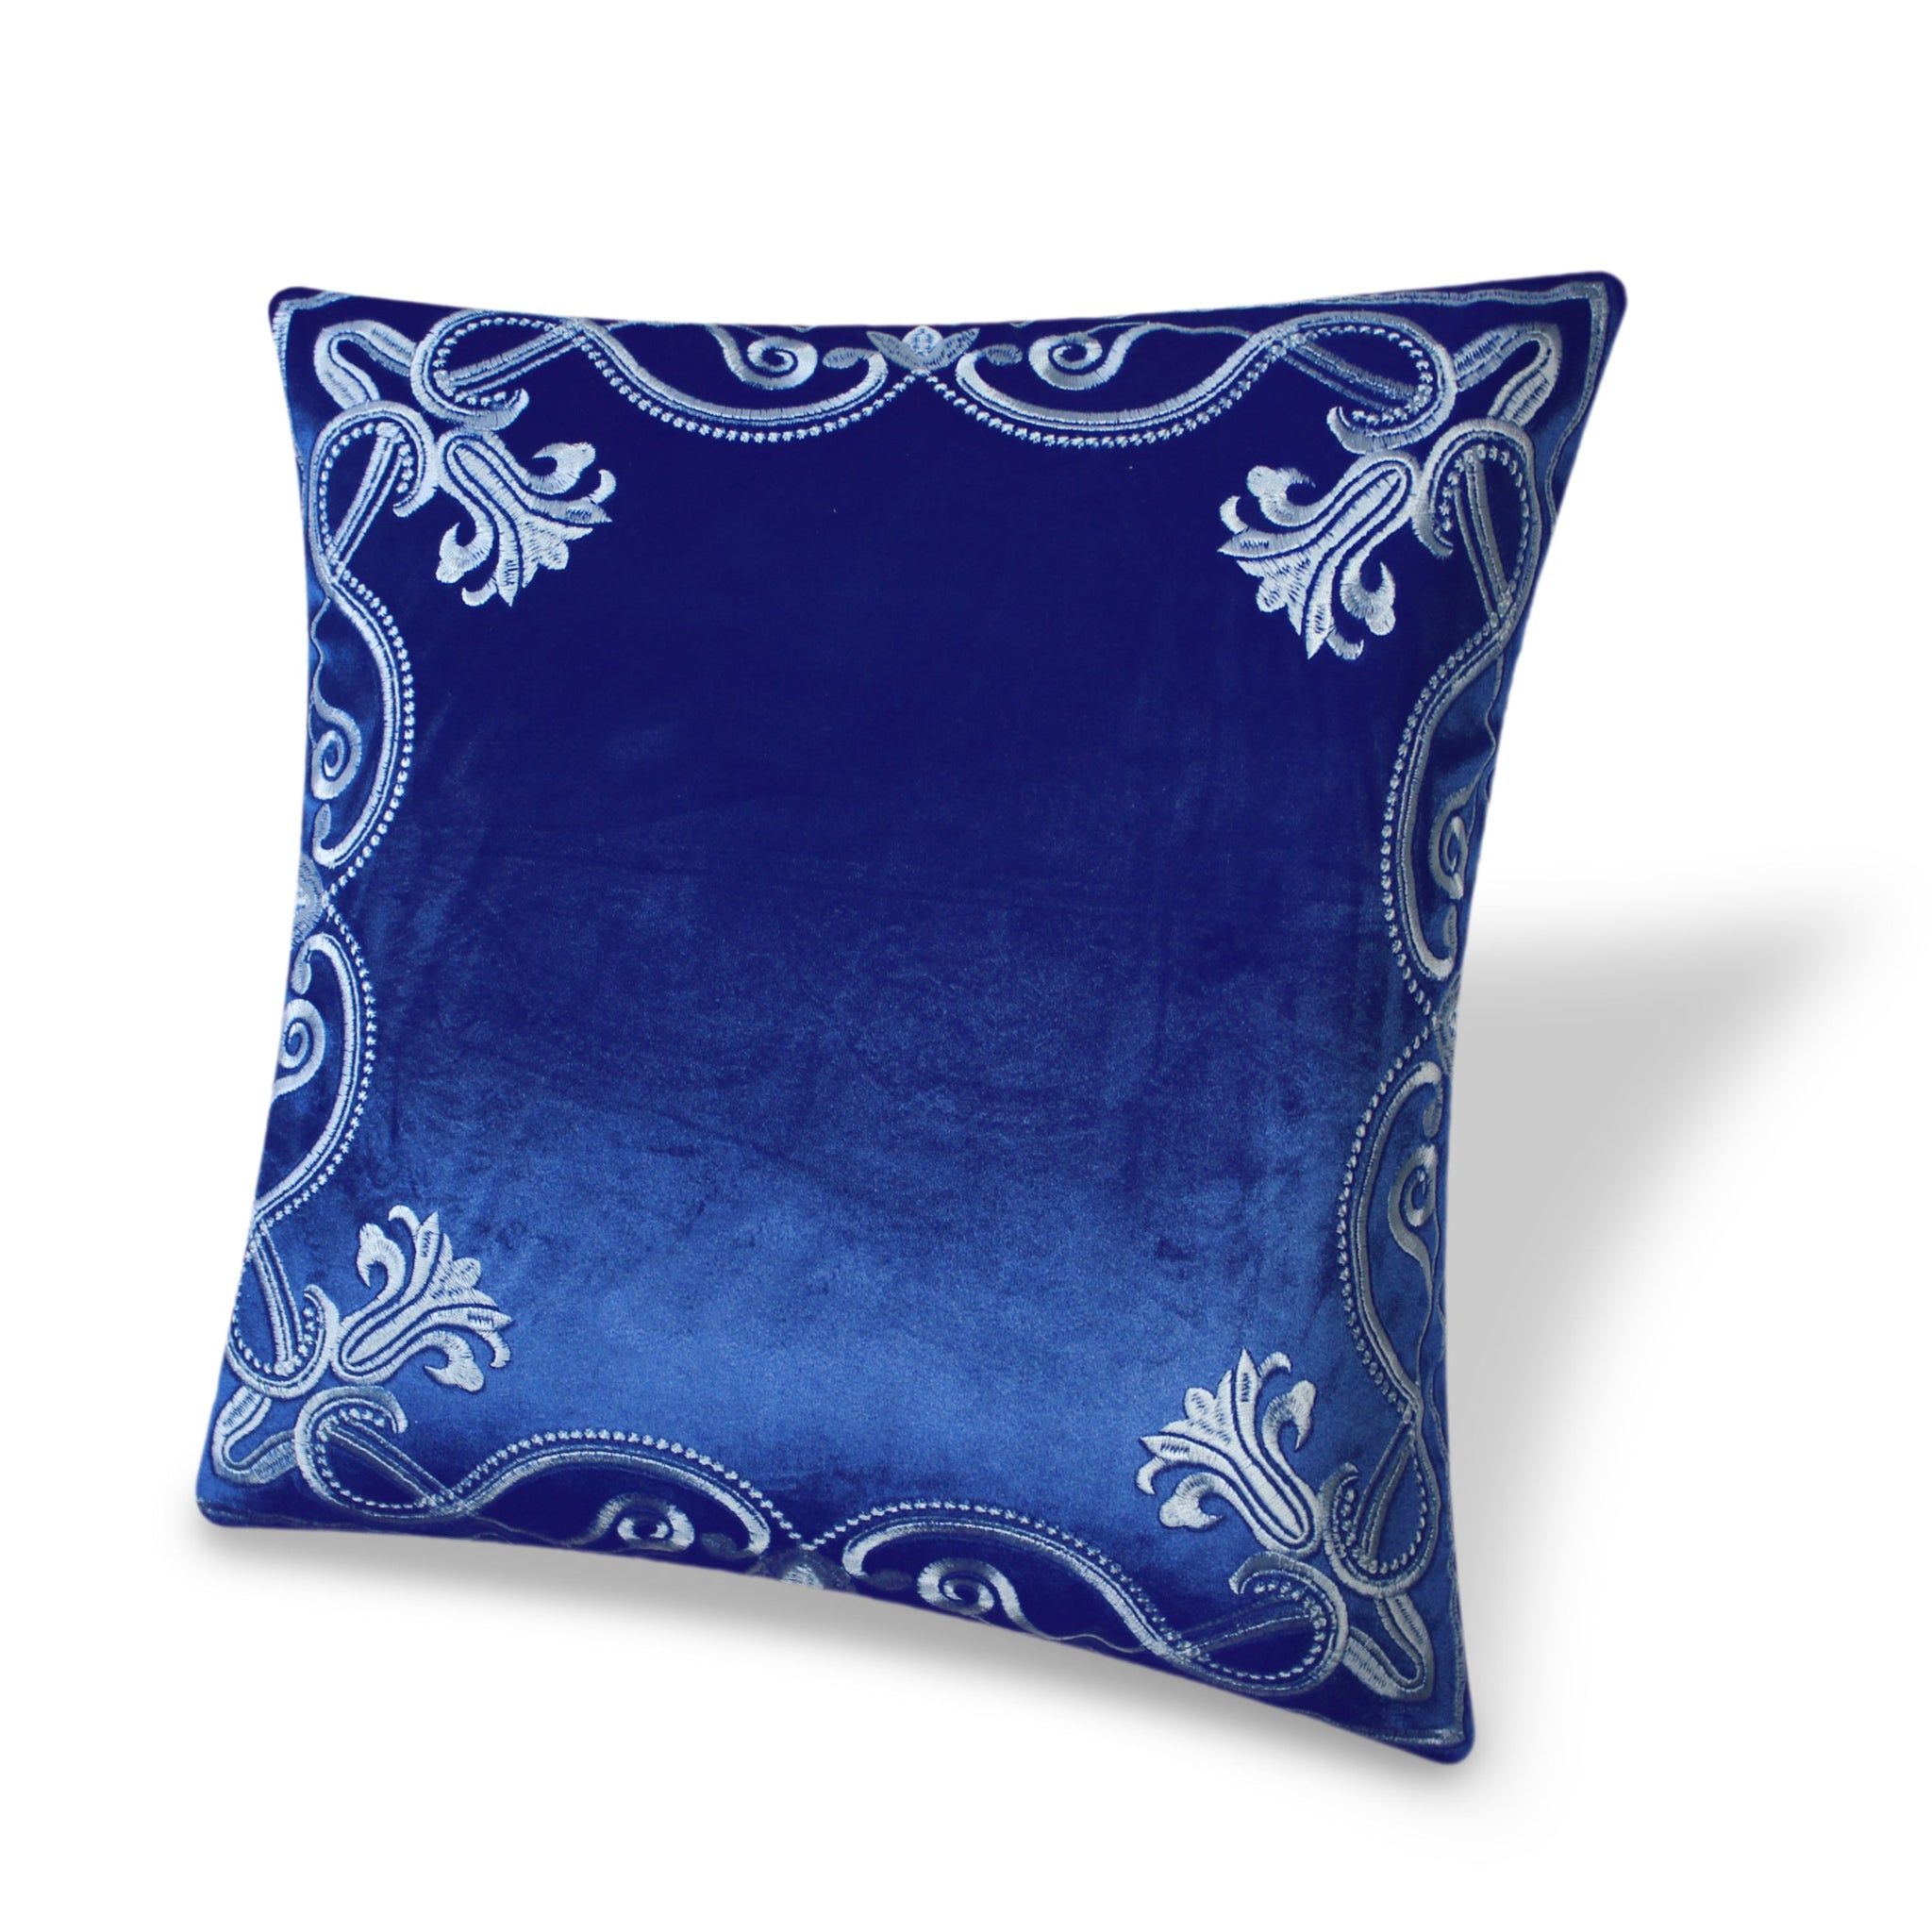 Blue Luxury Embroidered Baroque Cushion Covers Velvet Pillow Case Home Decorative Sofa Throw Pillows